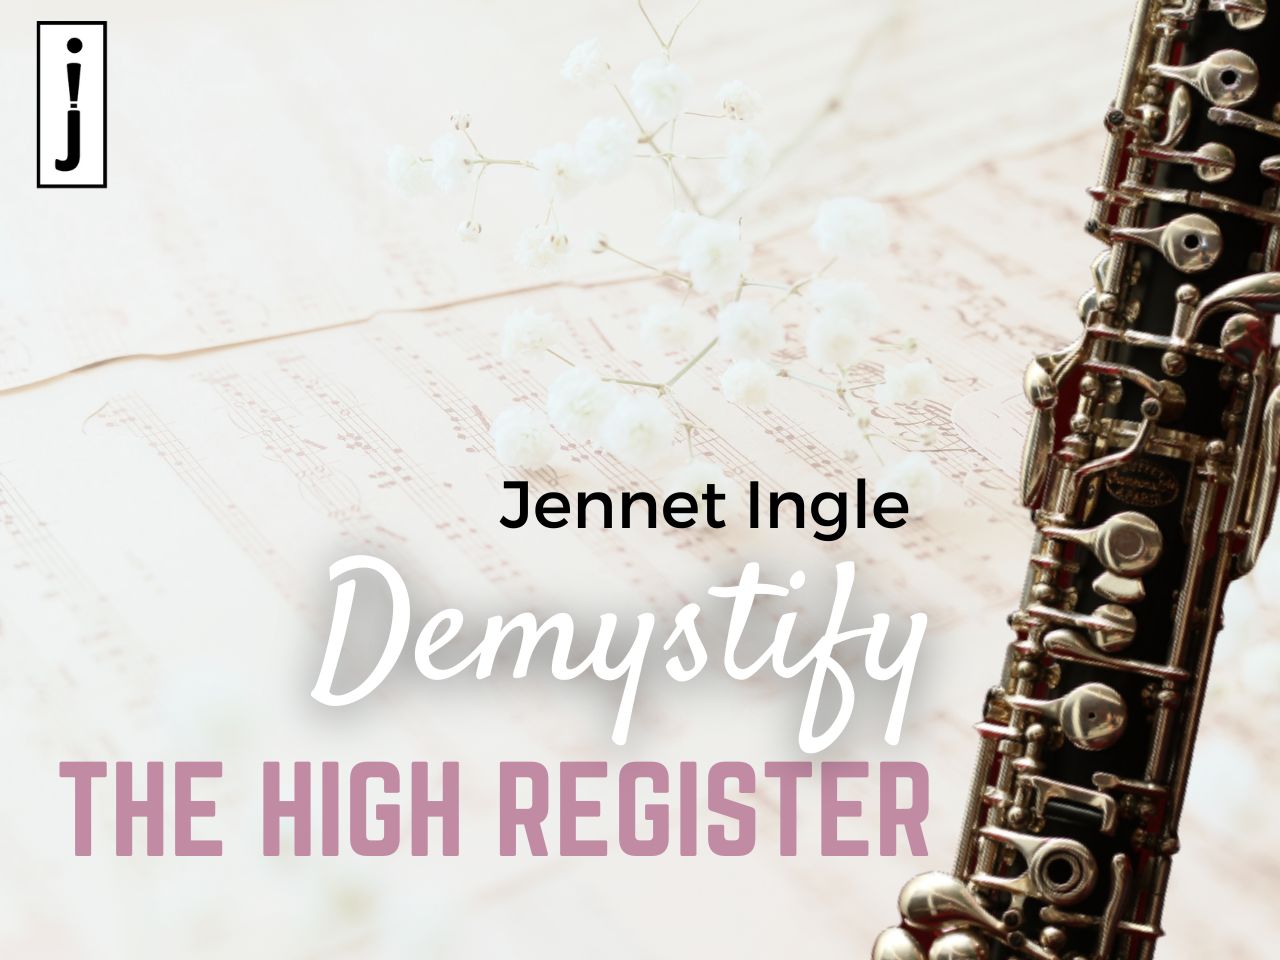 Demystify the High Register oboe image